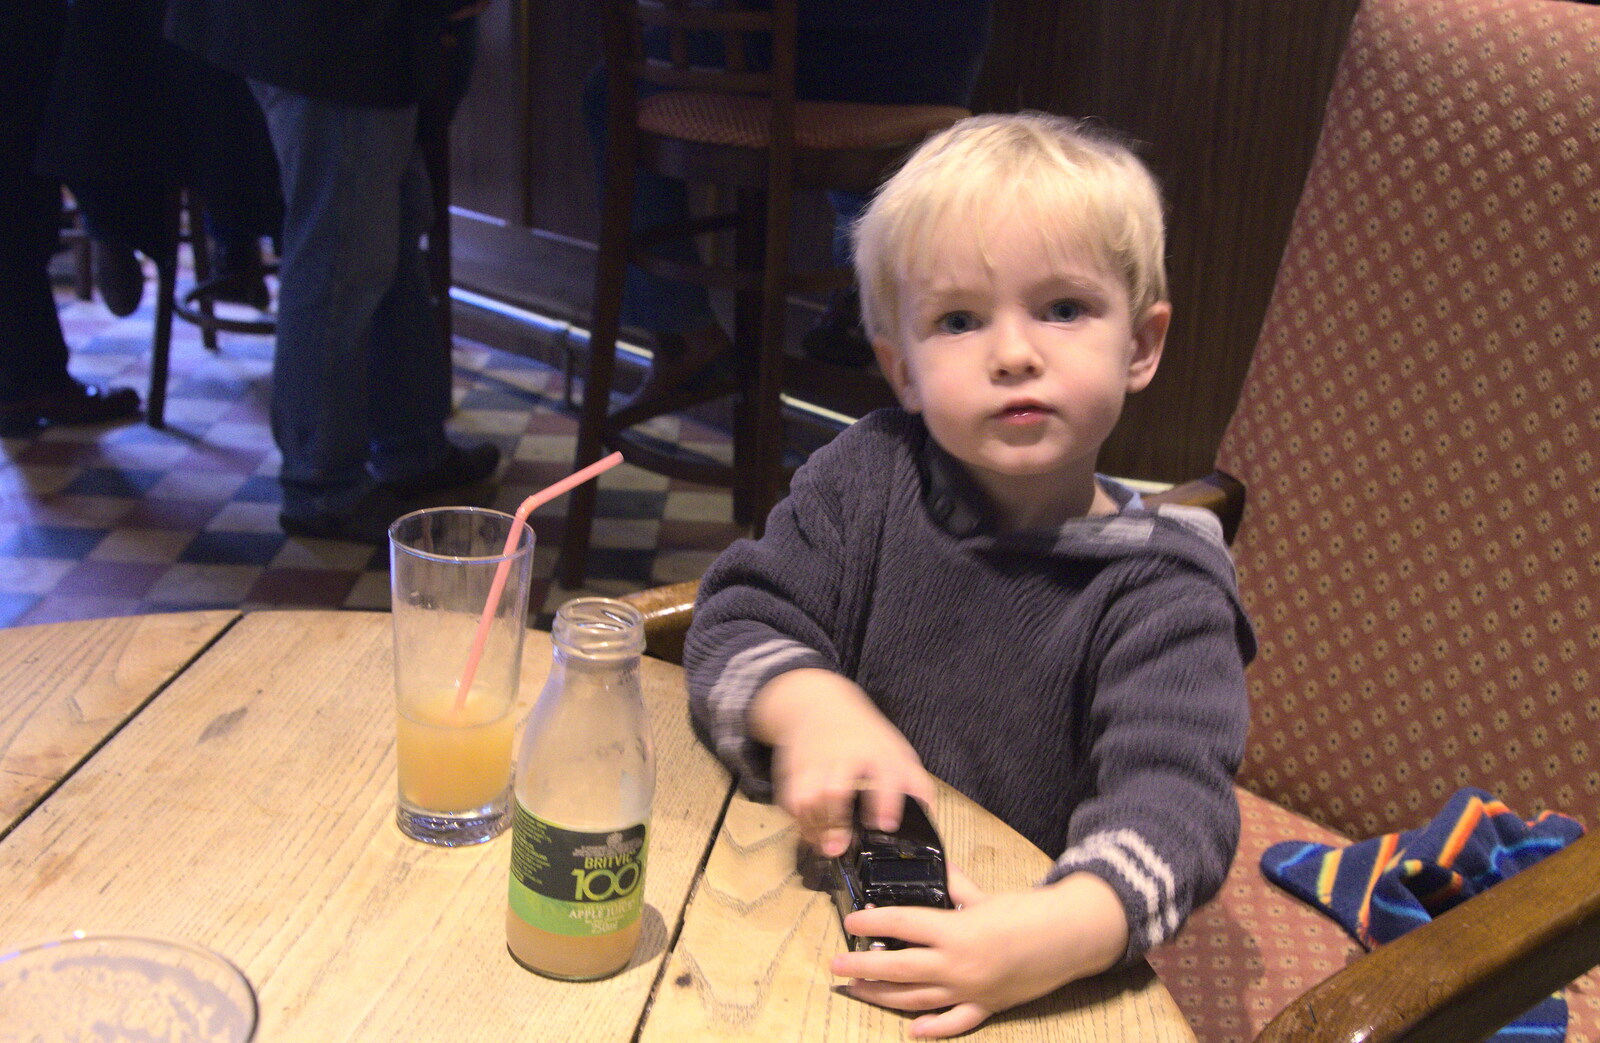 Harry in the Oaksmere bar from The Lorry-Eating Pavement of Diss, Norfolk - 3rd December